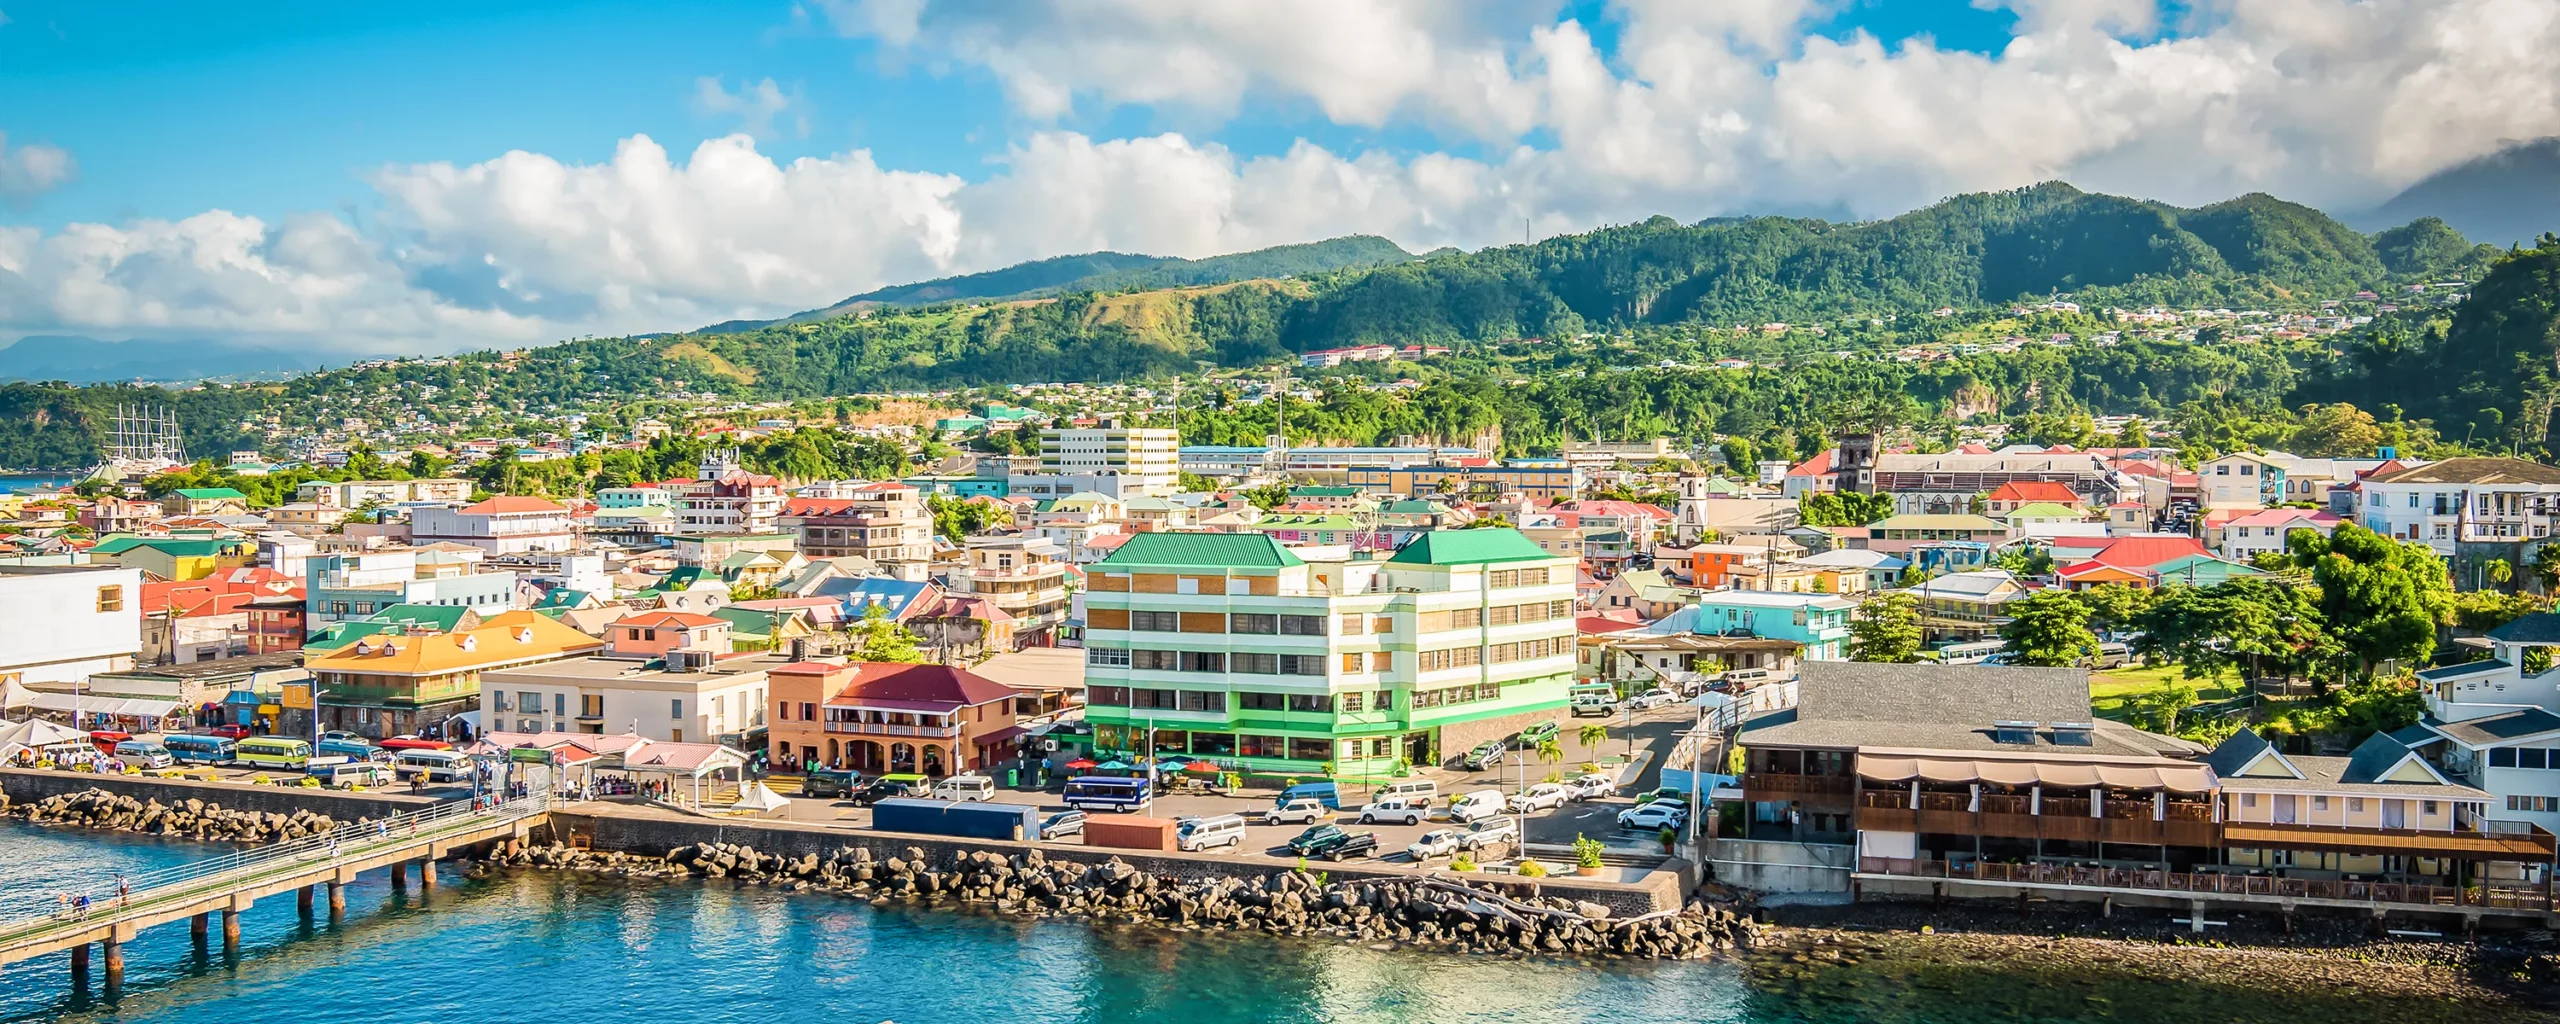 Dominica Citizenship By Investment